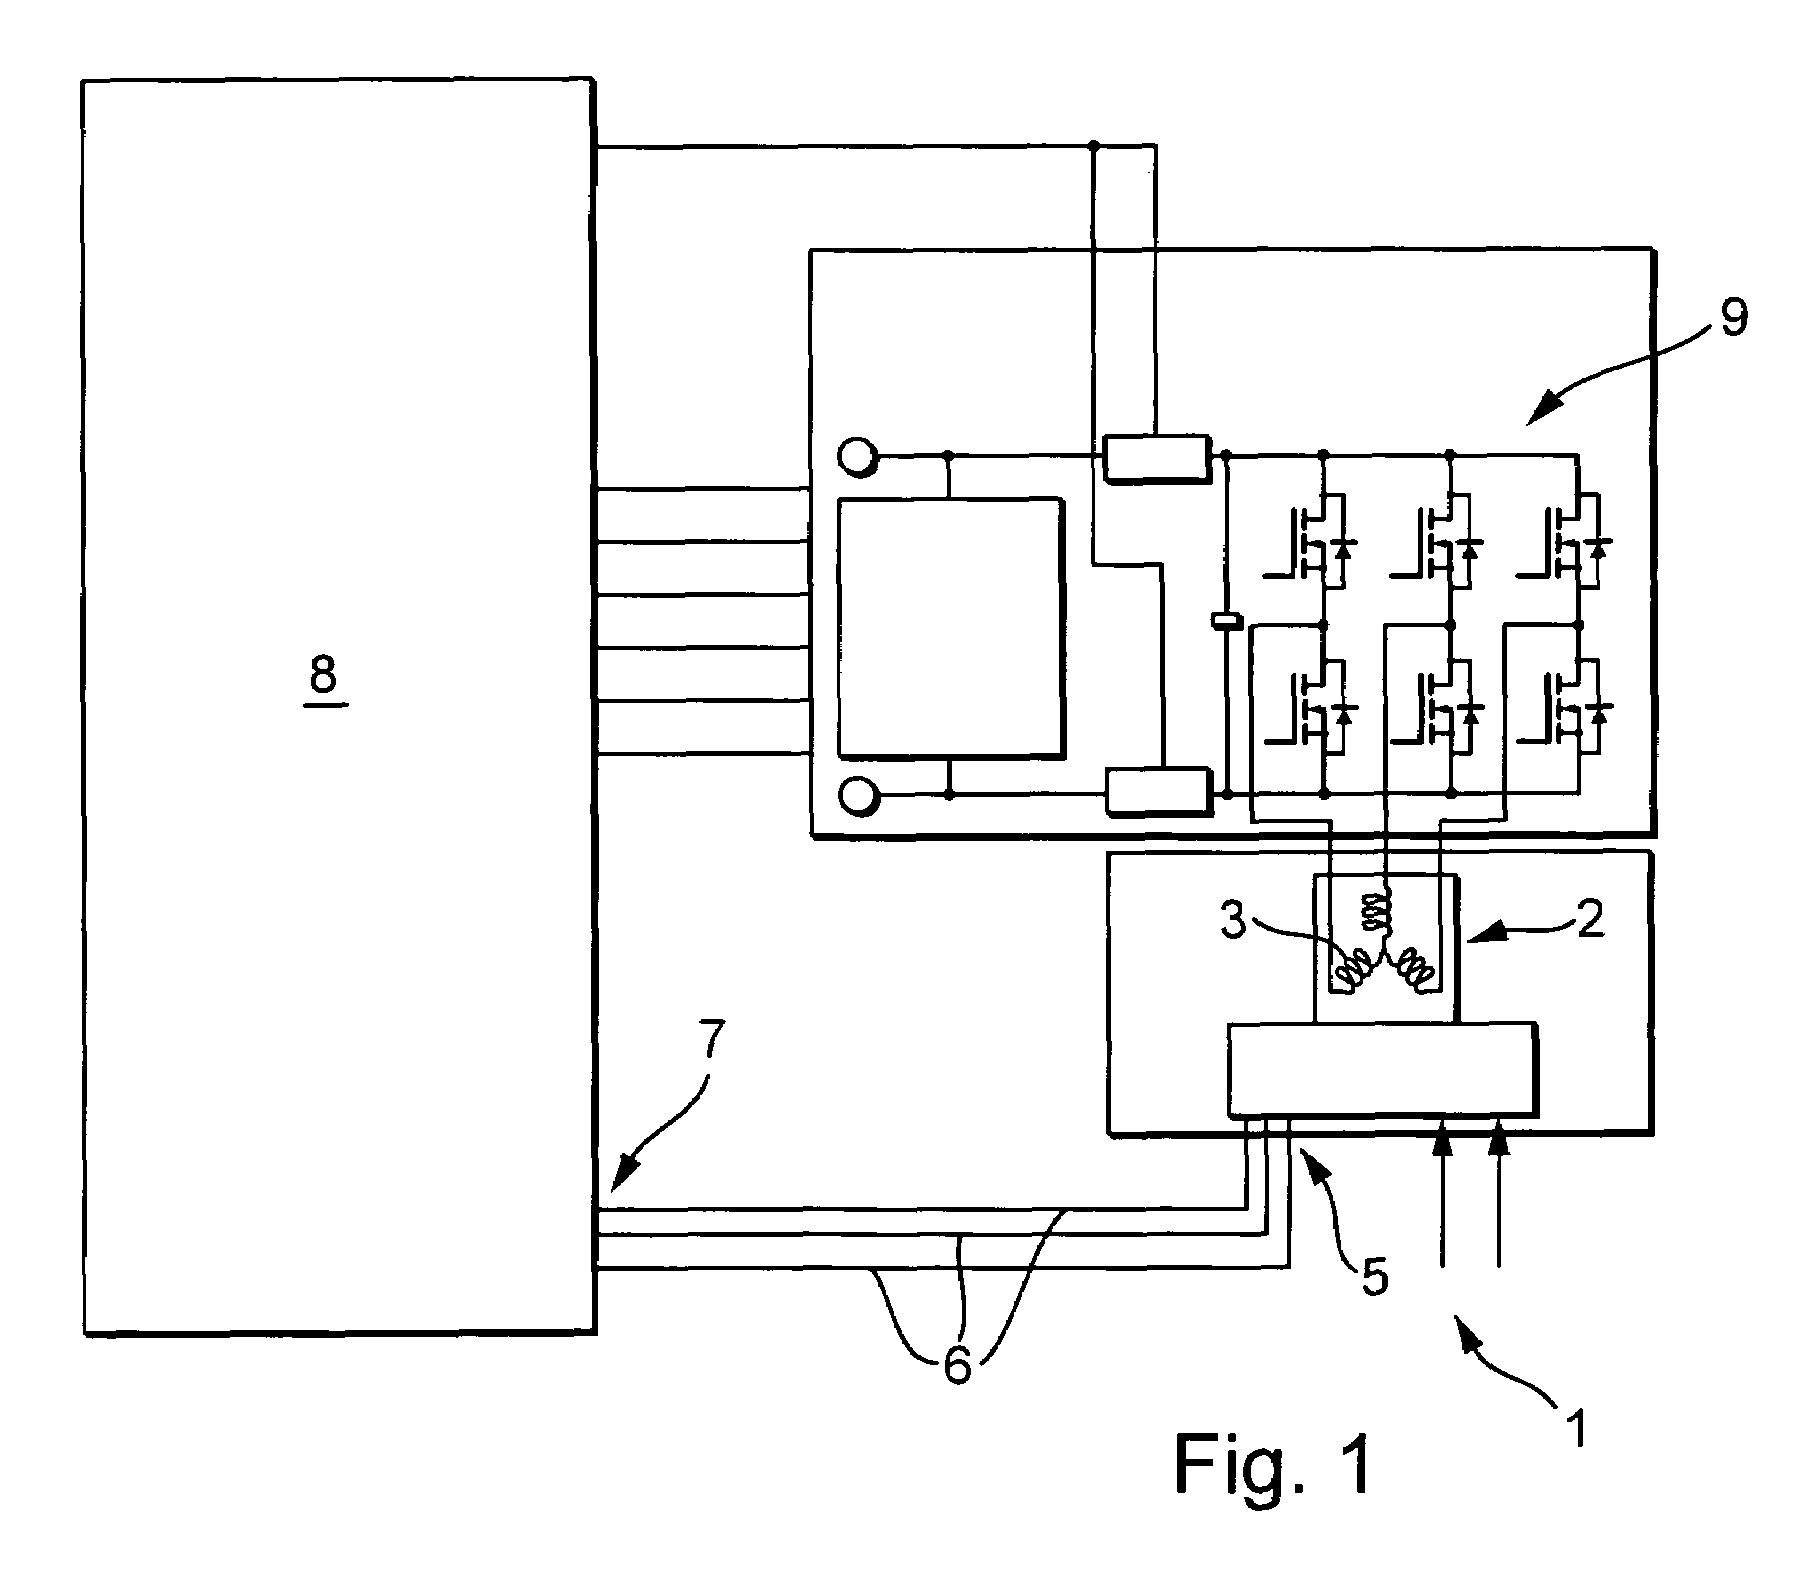 Actuator for the actuation of a clutch and/or a gear mechanism